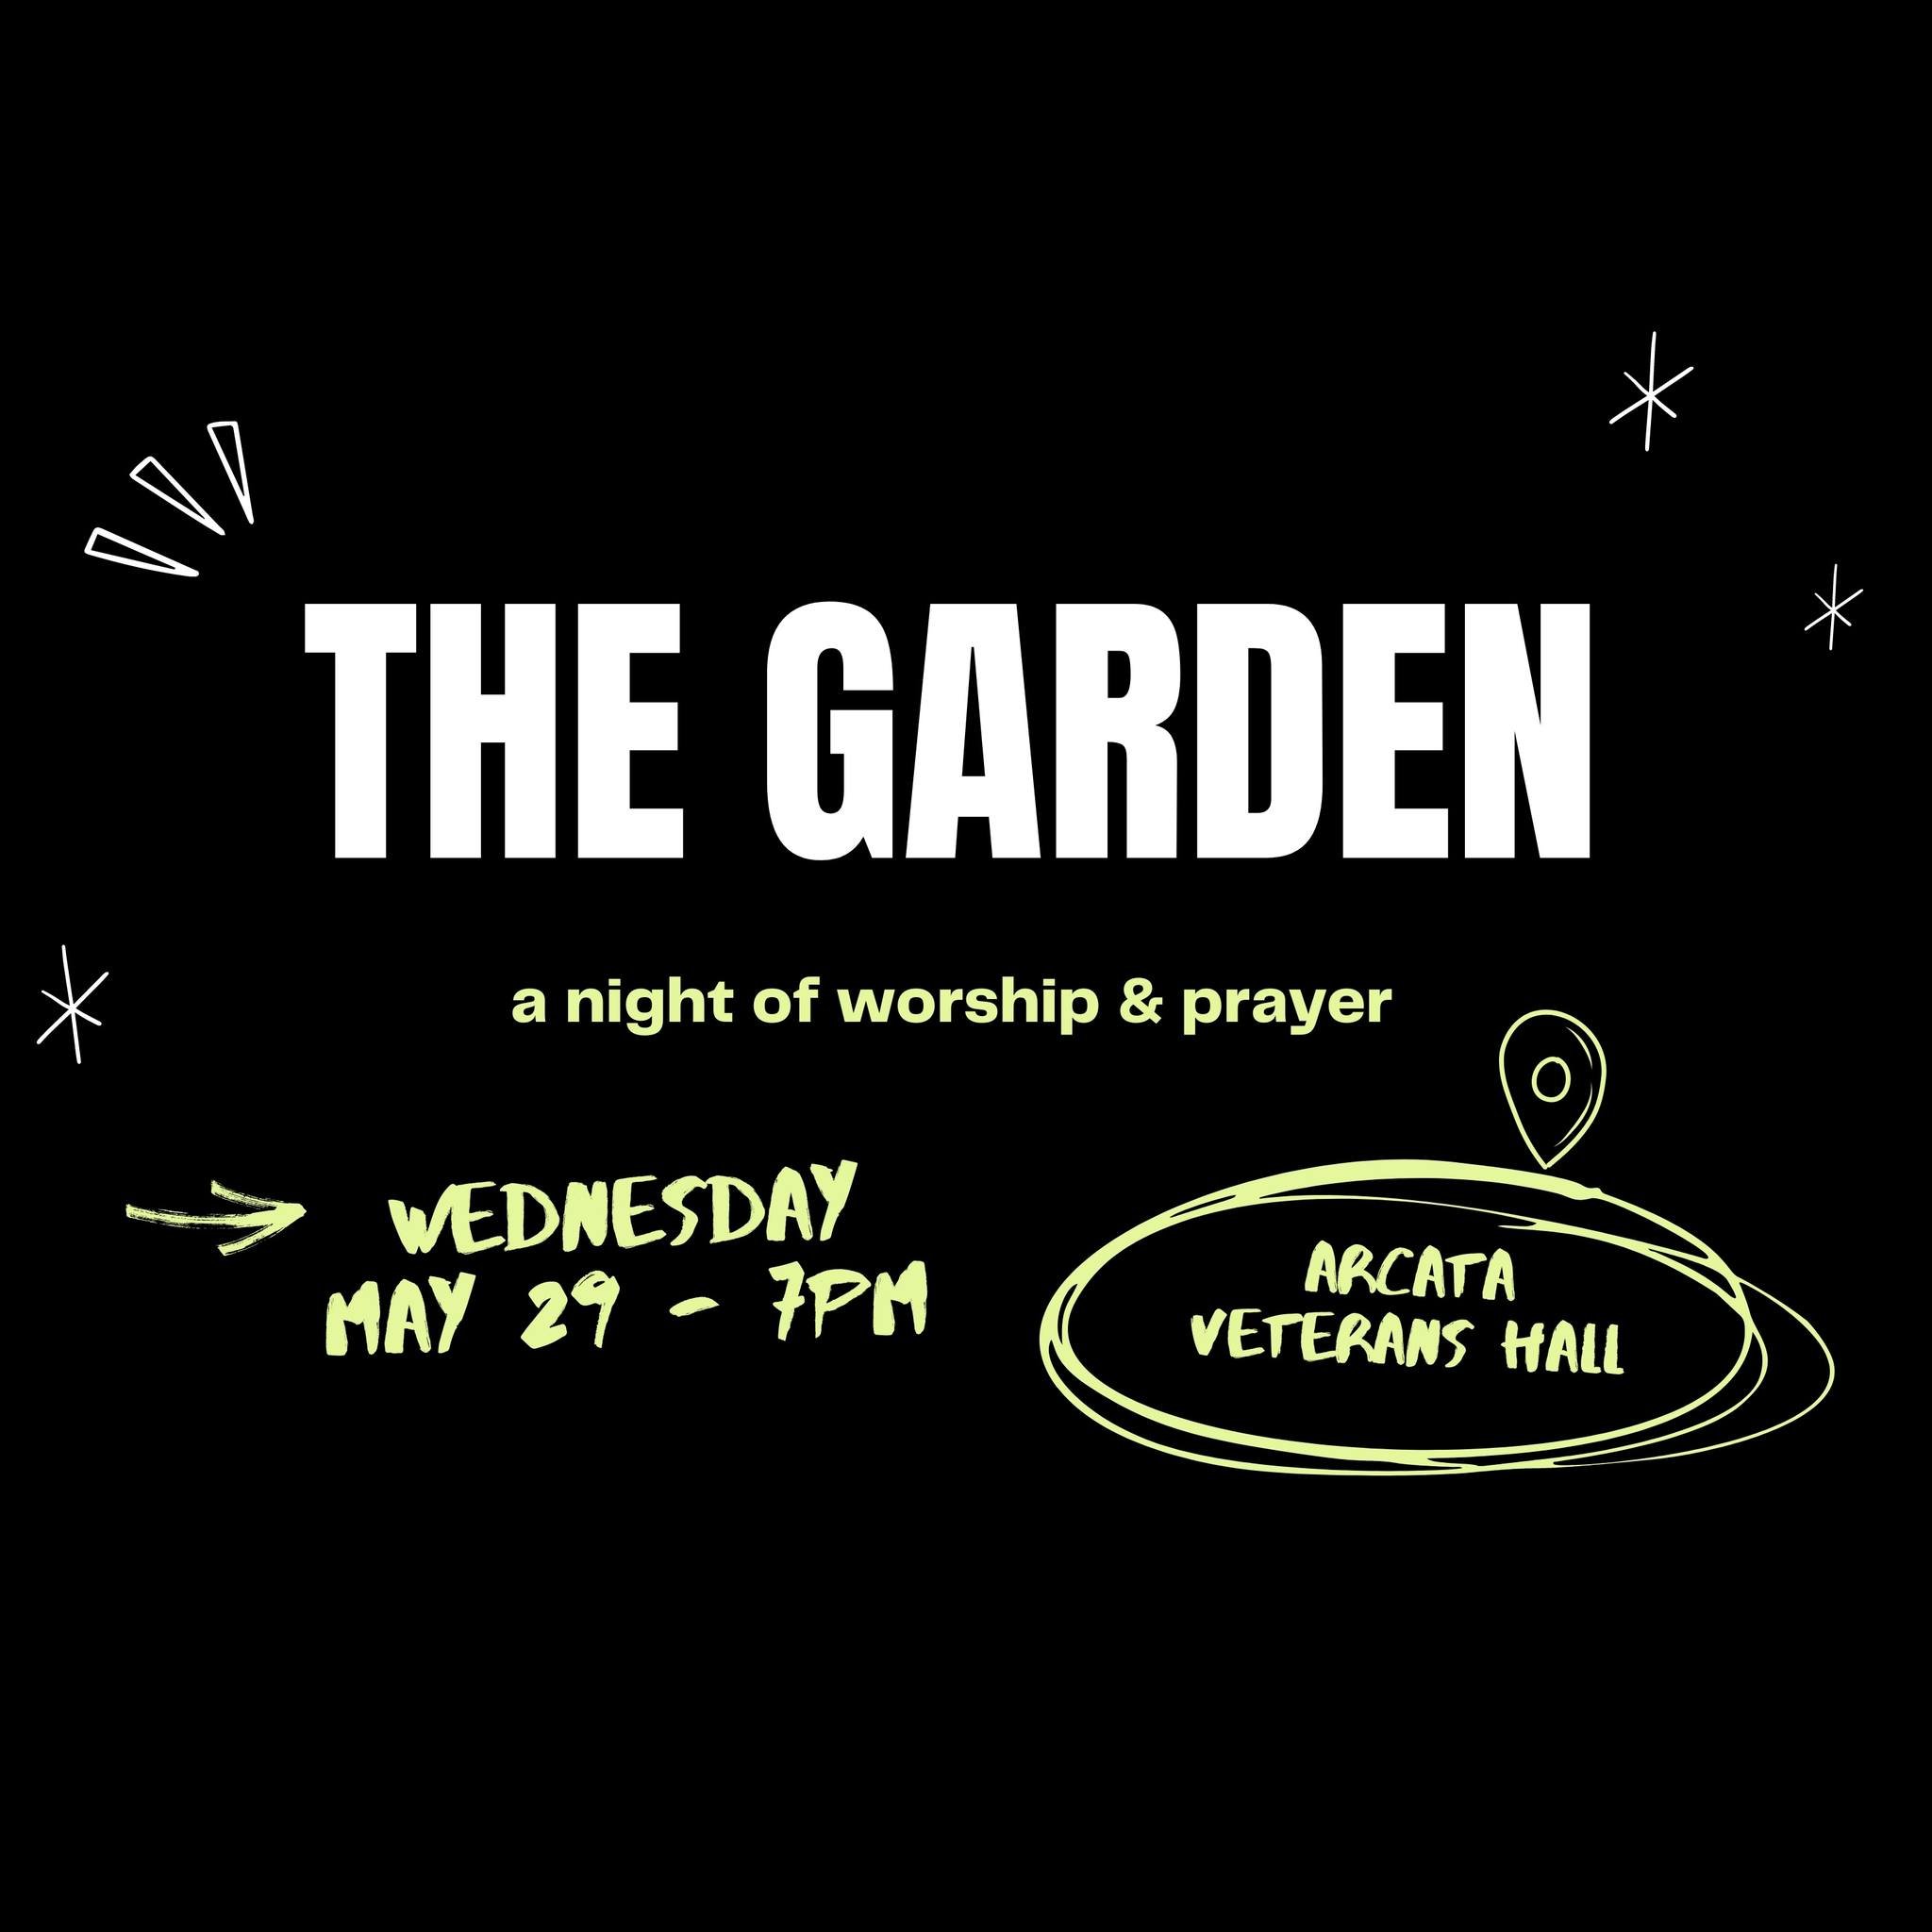 FAMILY WORSHIP NIGHT

Our first mid-week, family-friendly, everyone-welcome, evening-gathering for worship and prayer is ON! It'll start around 7pm at the Arcata Veterans Hall on Wednesday night, May 29th. We'll end around 8:15-ish, and childcare opt